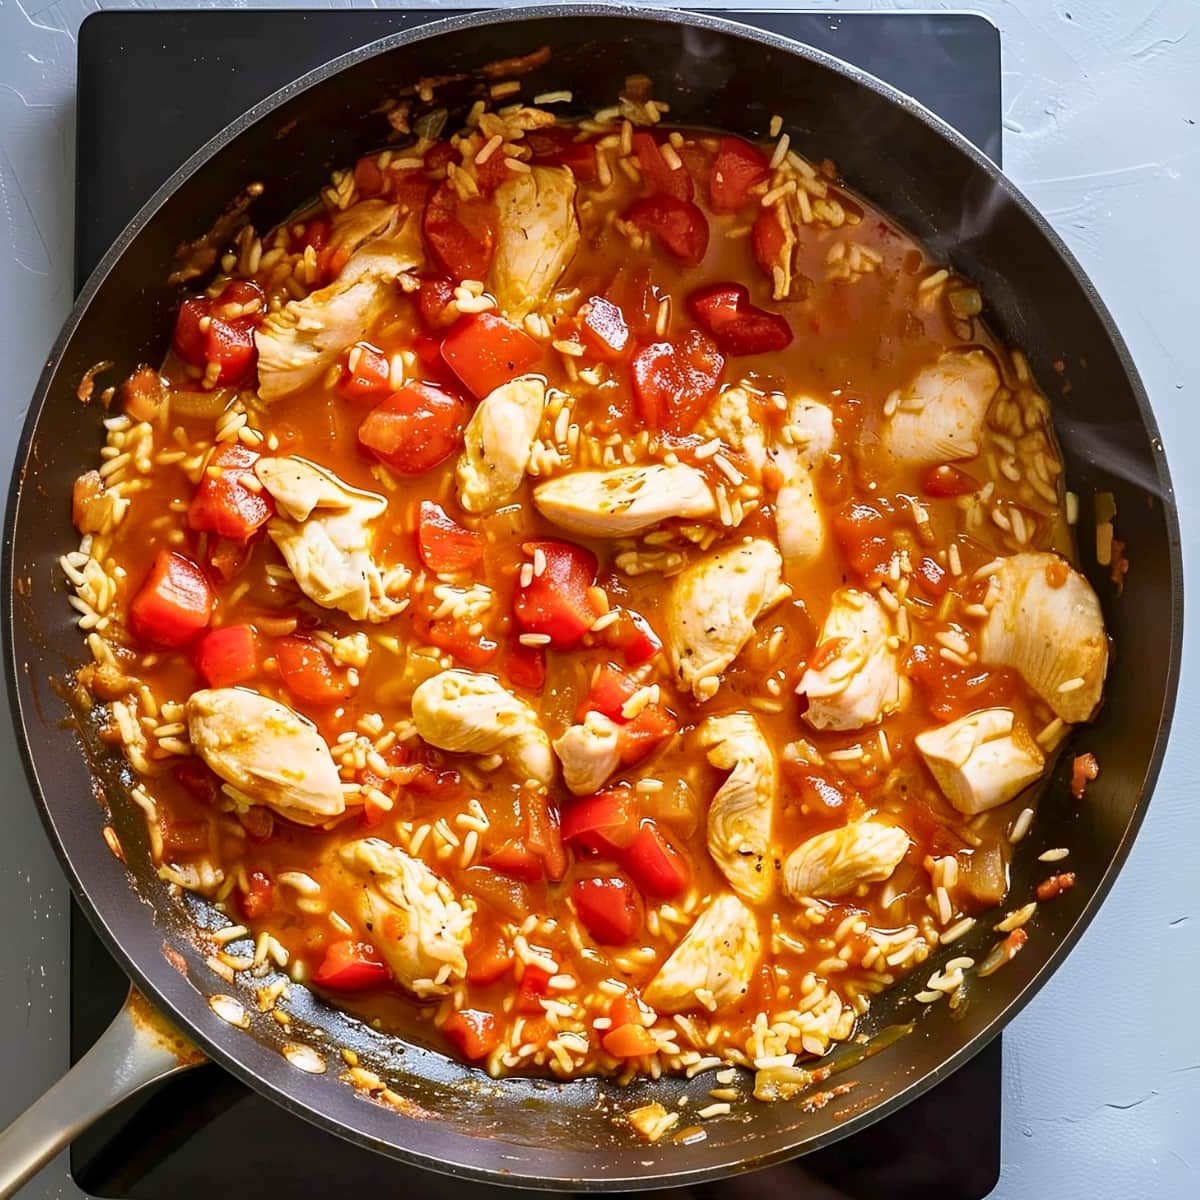 Top View of Chicken, Rice, and Tomatoes in a Skillet over a Hot Plate